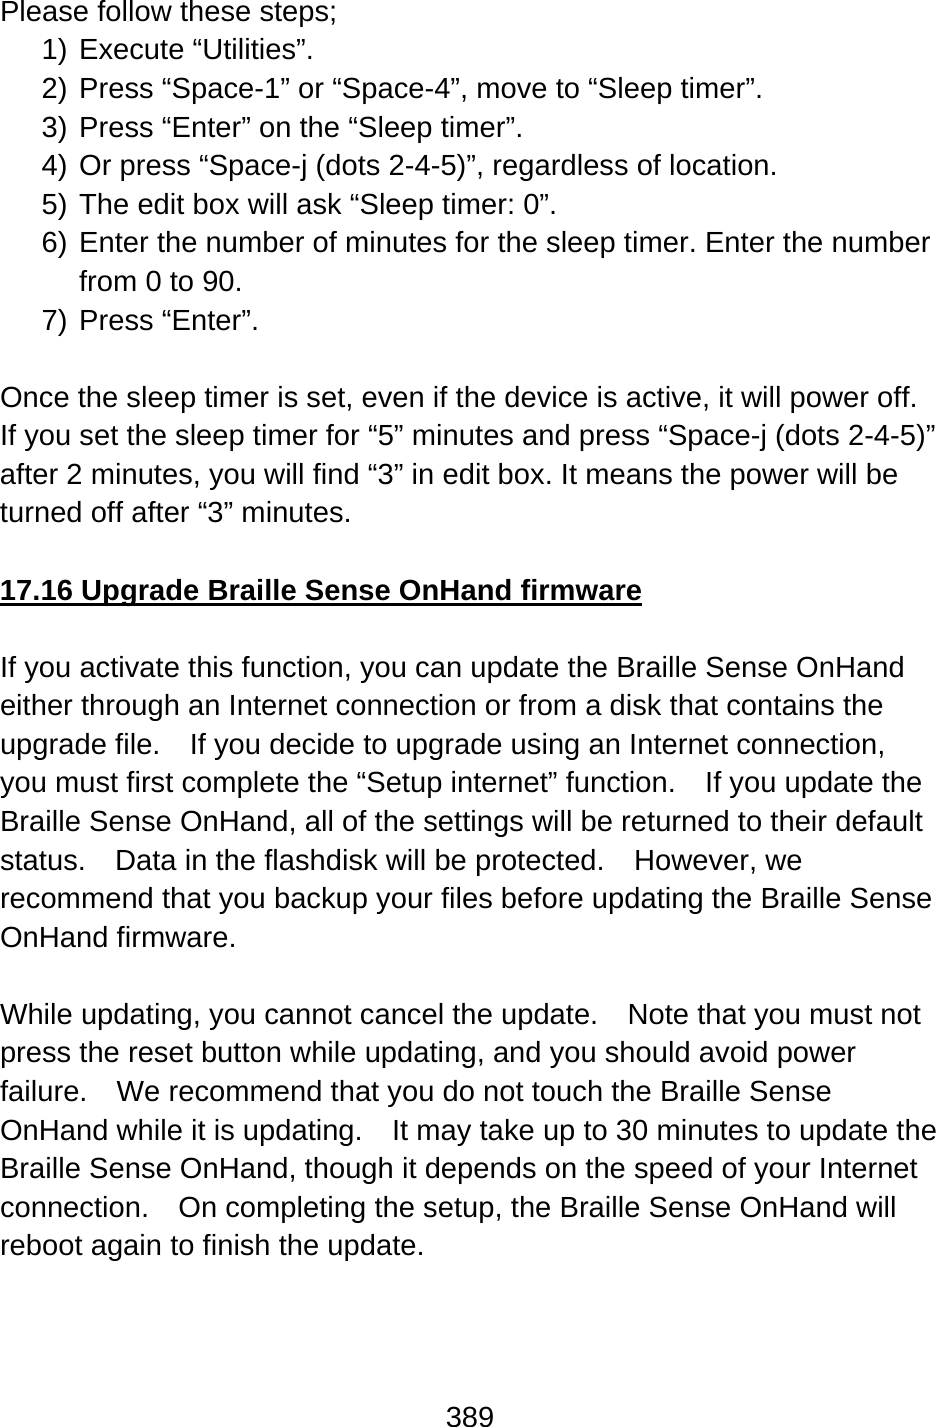 389  Please follow these steps; 1) Execute “Utilities”. 2) Press “Space-1” or “Space-4”, move to “Sleep timer”. 3) Press “Enter” on the “Sleep timer”. 4) Or press “Space-j (dots 2-4-5)”, regardless of location. 5) The edit box will ask “Sleep timer: 0”. 6) Enter the number of minutes for the sleep timer. Enter the number from 0 to 90. 7) Press “Enter”.  Once the sleep timer is set, even if the device is active, it will power off. If you set the sleep timer for “5” minutes and press “Space-j (dots 2-4-5)” after 2 minutes, you will find “3” in edit box. It means the power will be turned off after “3” minutes.    17.16 Upgrade Braille Sense OnHand firmware  If you activate this function, you can update the Braille Sense OnHand either through an Internet connection or from a disk that contains the upgrade file.    If you decide to upgrade using an Internet connection, you must first complete the “Setup internet” function.  If you update the Braille Sense OnHand, all of the settings will be returned to their default status.    Data in the flashdisk will be protected.    However, we recommend that you backup your files before updating the Braille Sense OnHand firmware.  While updating, you cannot cancel the update.    Note that you must not press the reset button while updating, and you should avoid power failure.    We recommend that you do not touch the Braille Sense OnHand while it is updating.    It may take up to 30 minutes to update the Braille Sense OnHand, though it depends on the speed of your Internet connection.    On completing the setup, the Braille Sense OnHand will reboot again to finish the update.  